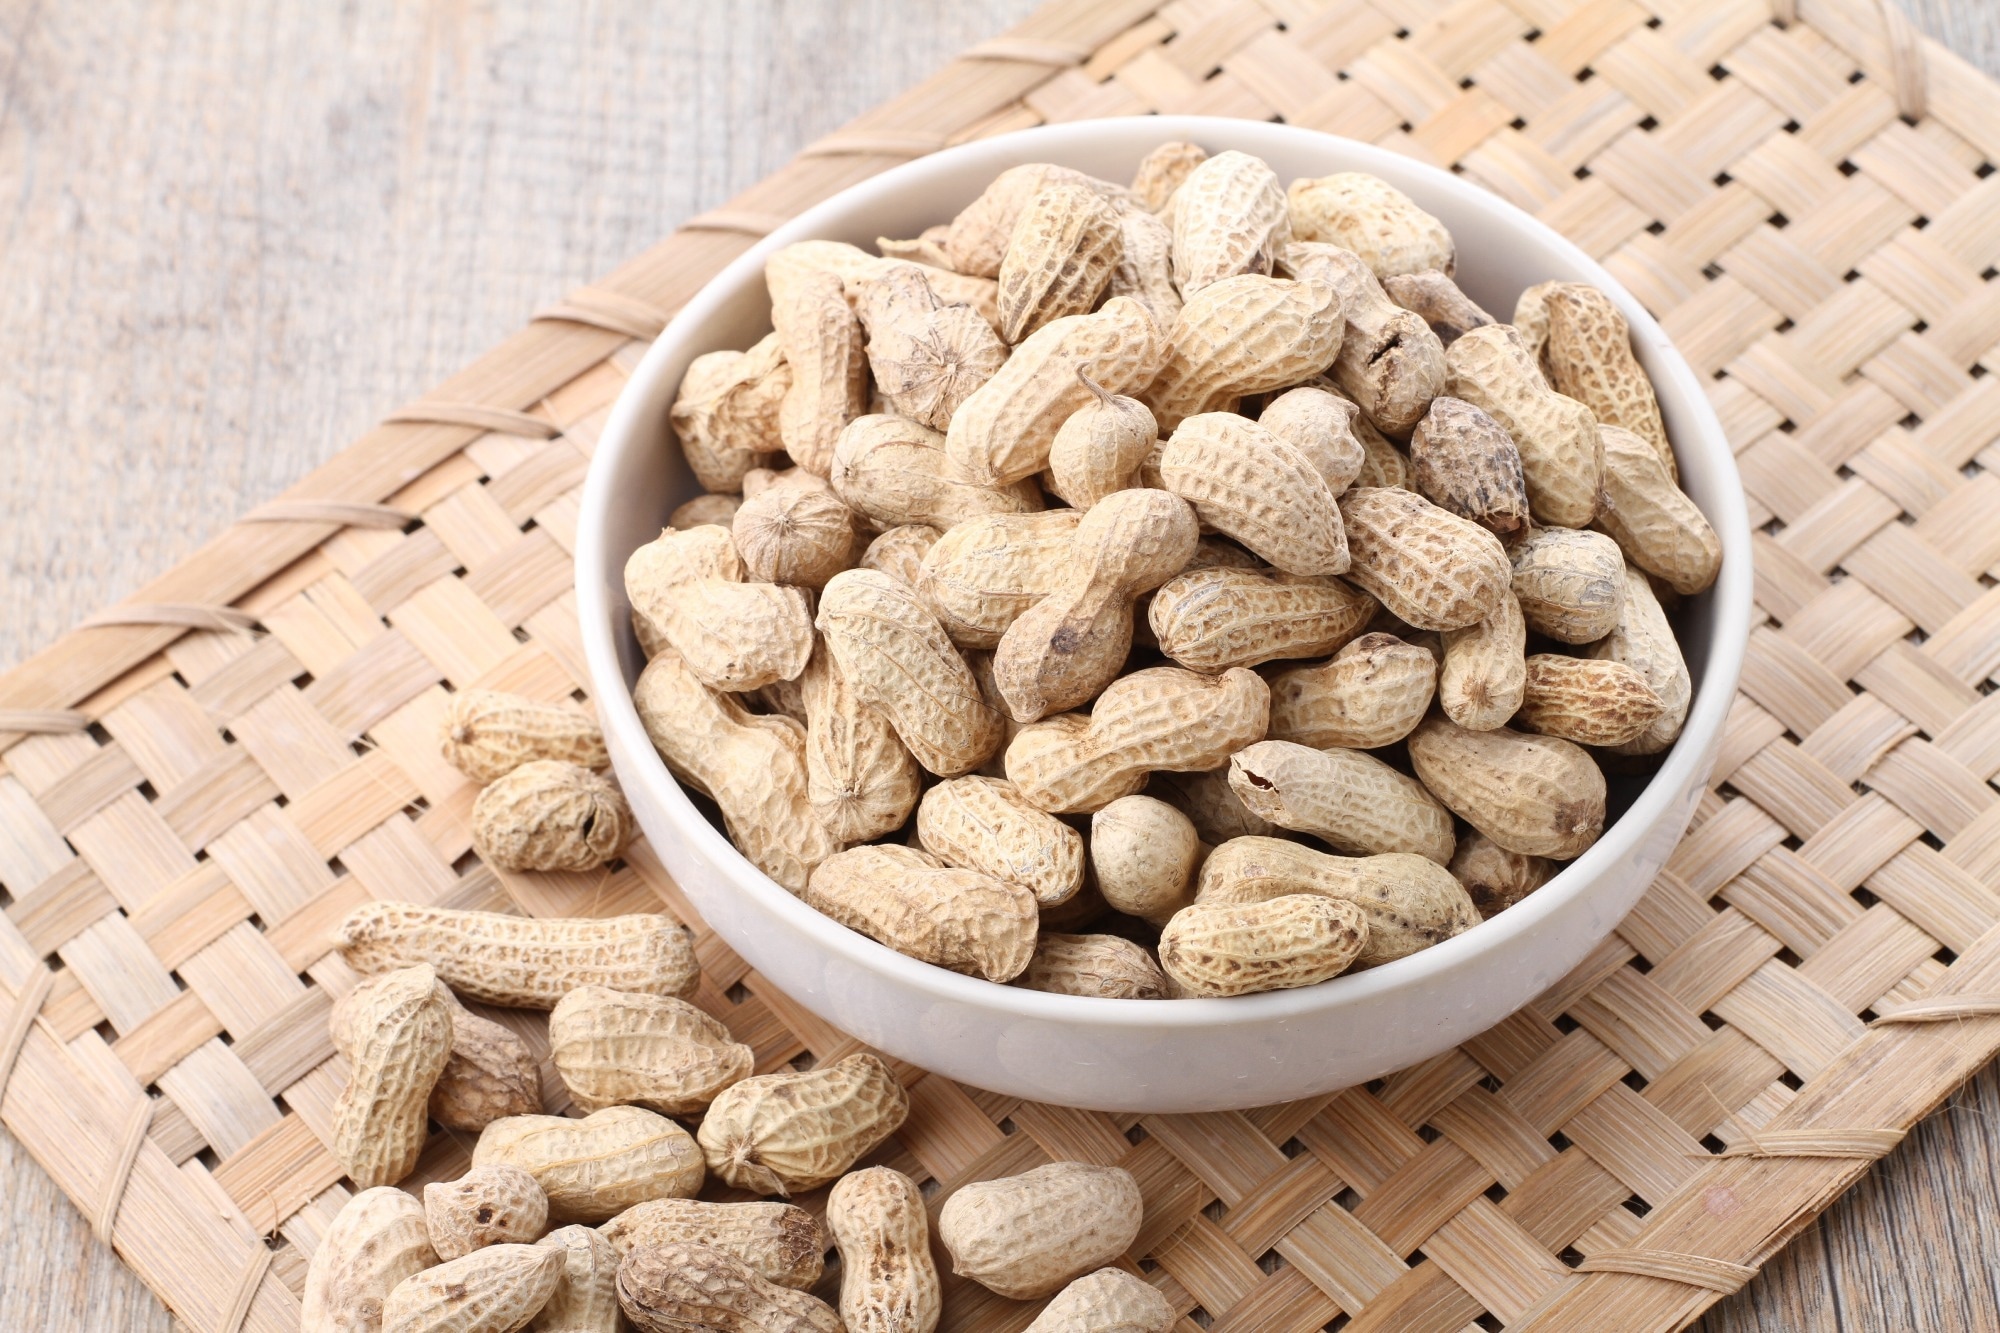 Study: The Protective Effect of Moderate Maternal Peanut Consumption on Peanut Sensitization and Allergy. Image Credit: Ricky_herawan/Shutterstock.com